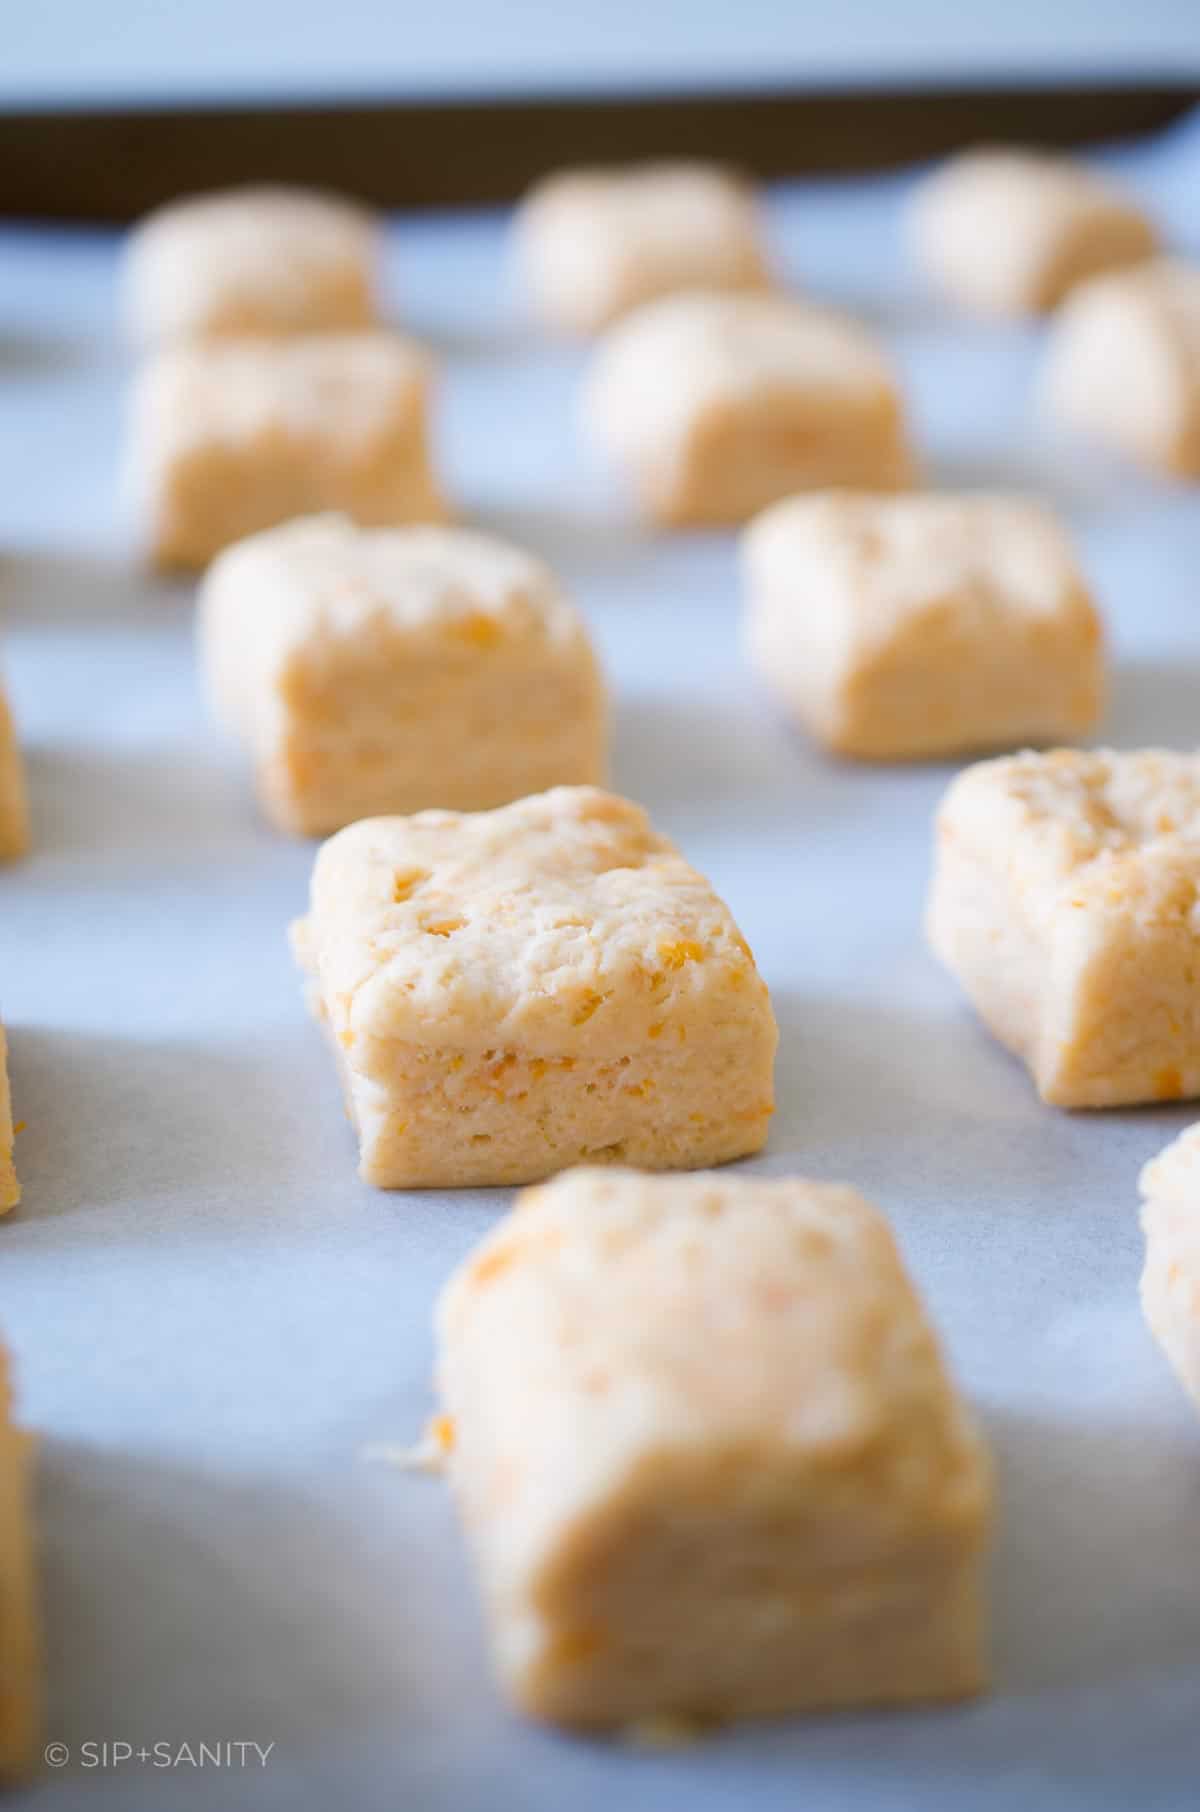 Prebaked square biscuits on a parchment lined sheet pan.